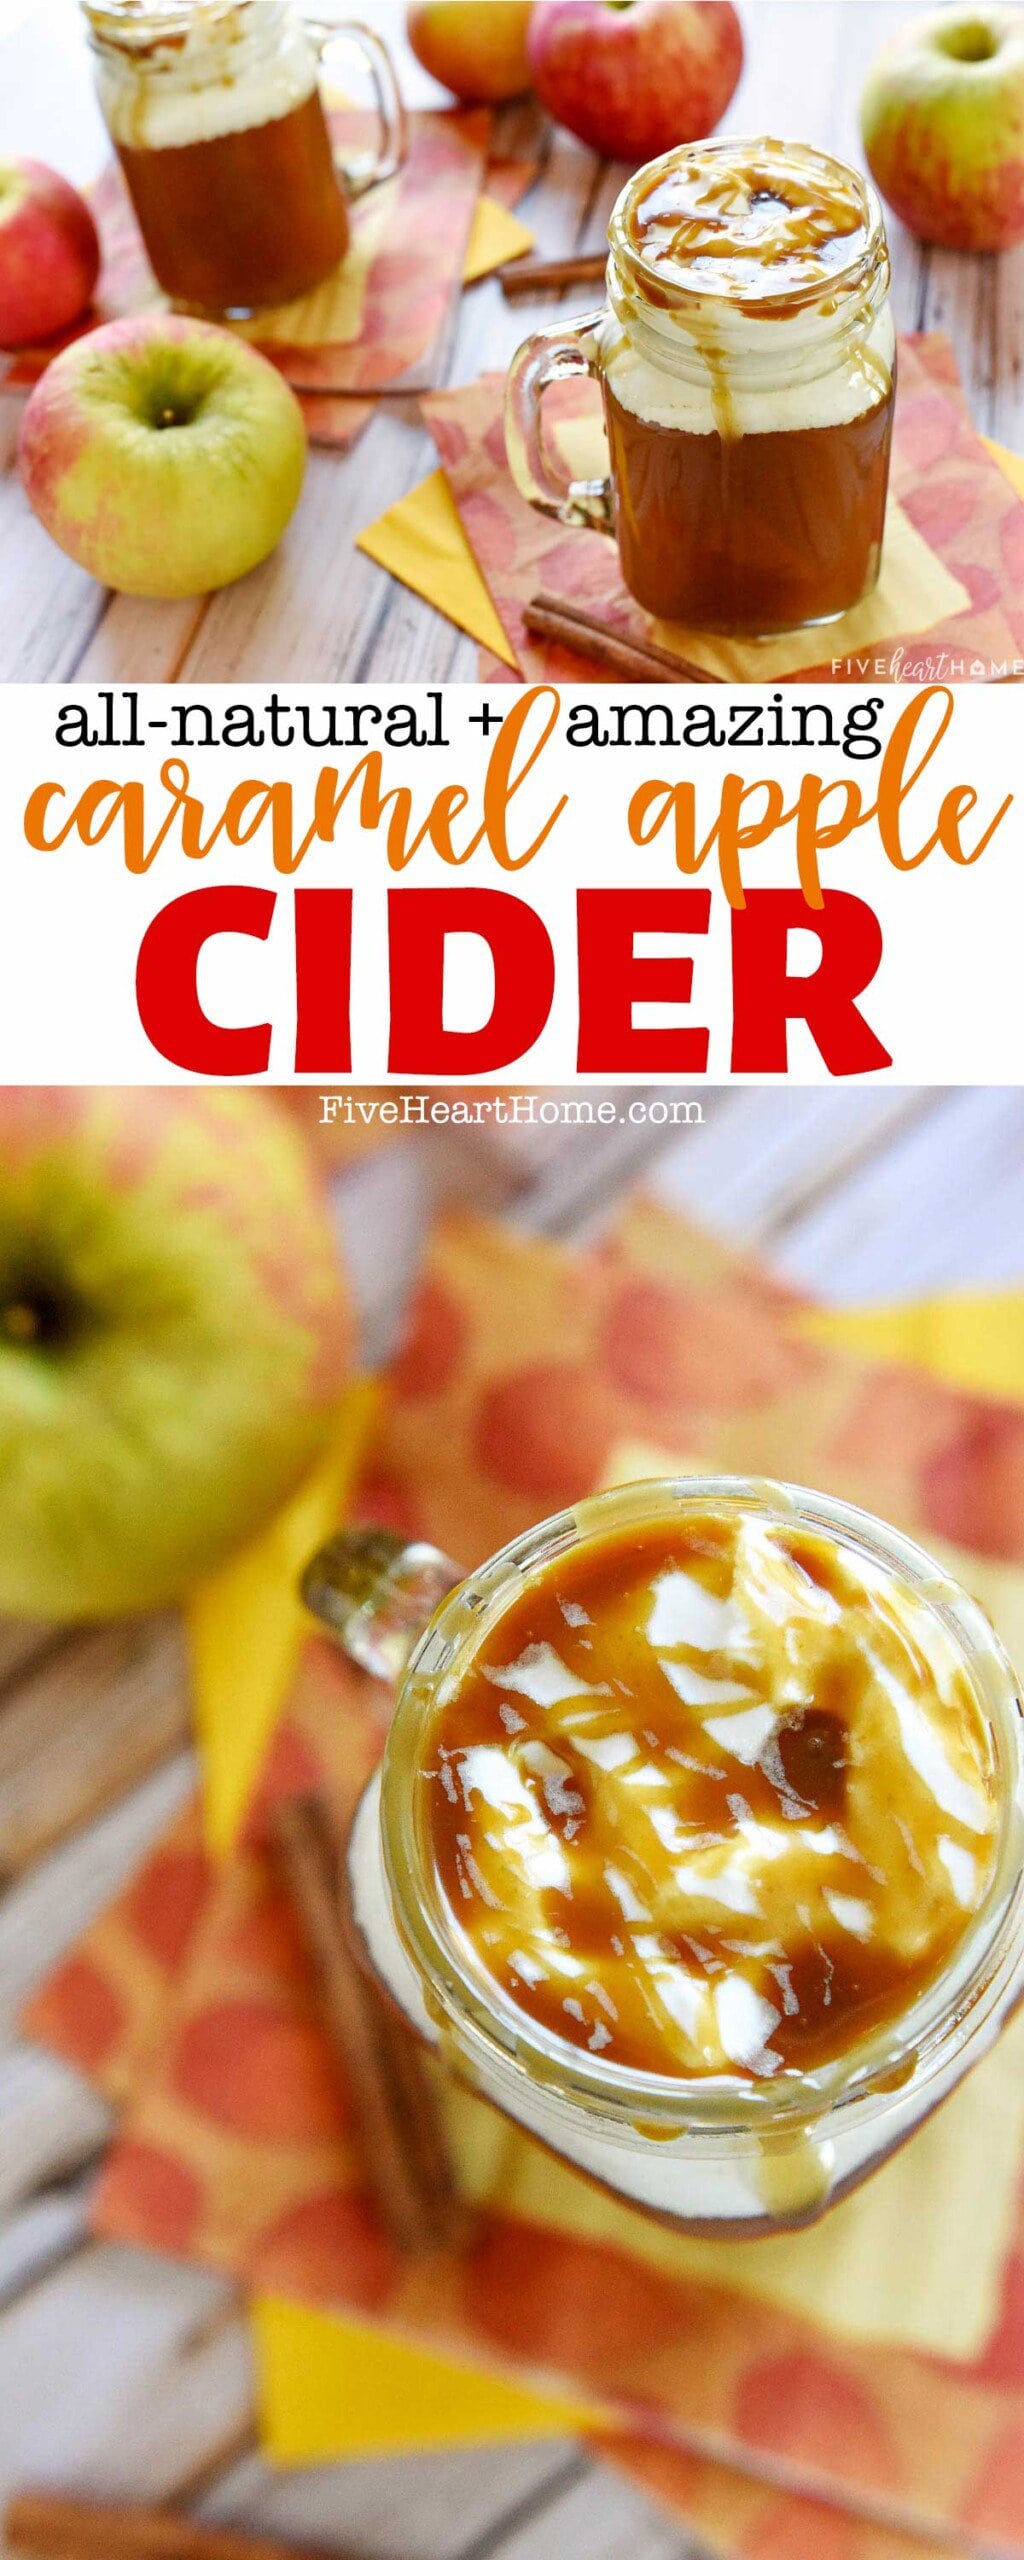 Caramel Apple Cider ~ this all-natural Starbucks copycat drink tastes like warm apple pie topped with vanilla ice cream...in a mug! | FiveHeartHome.com via @fivehearthome